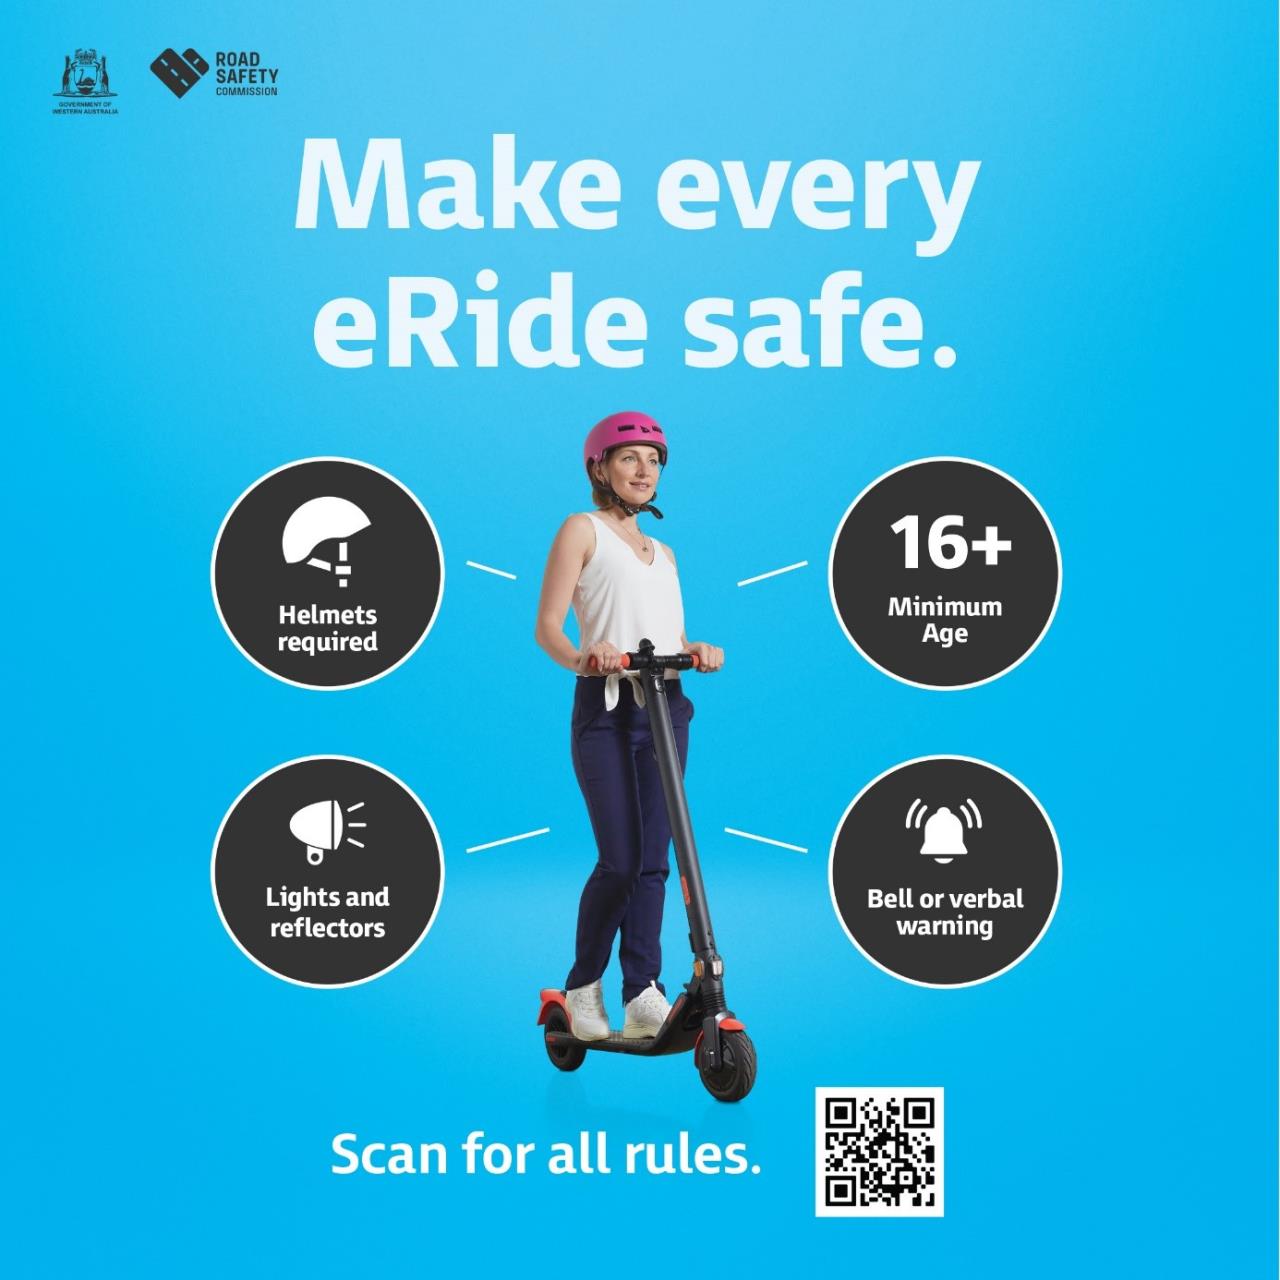 erideables rules image